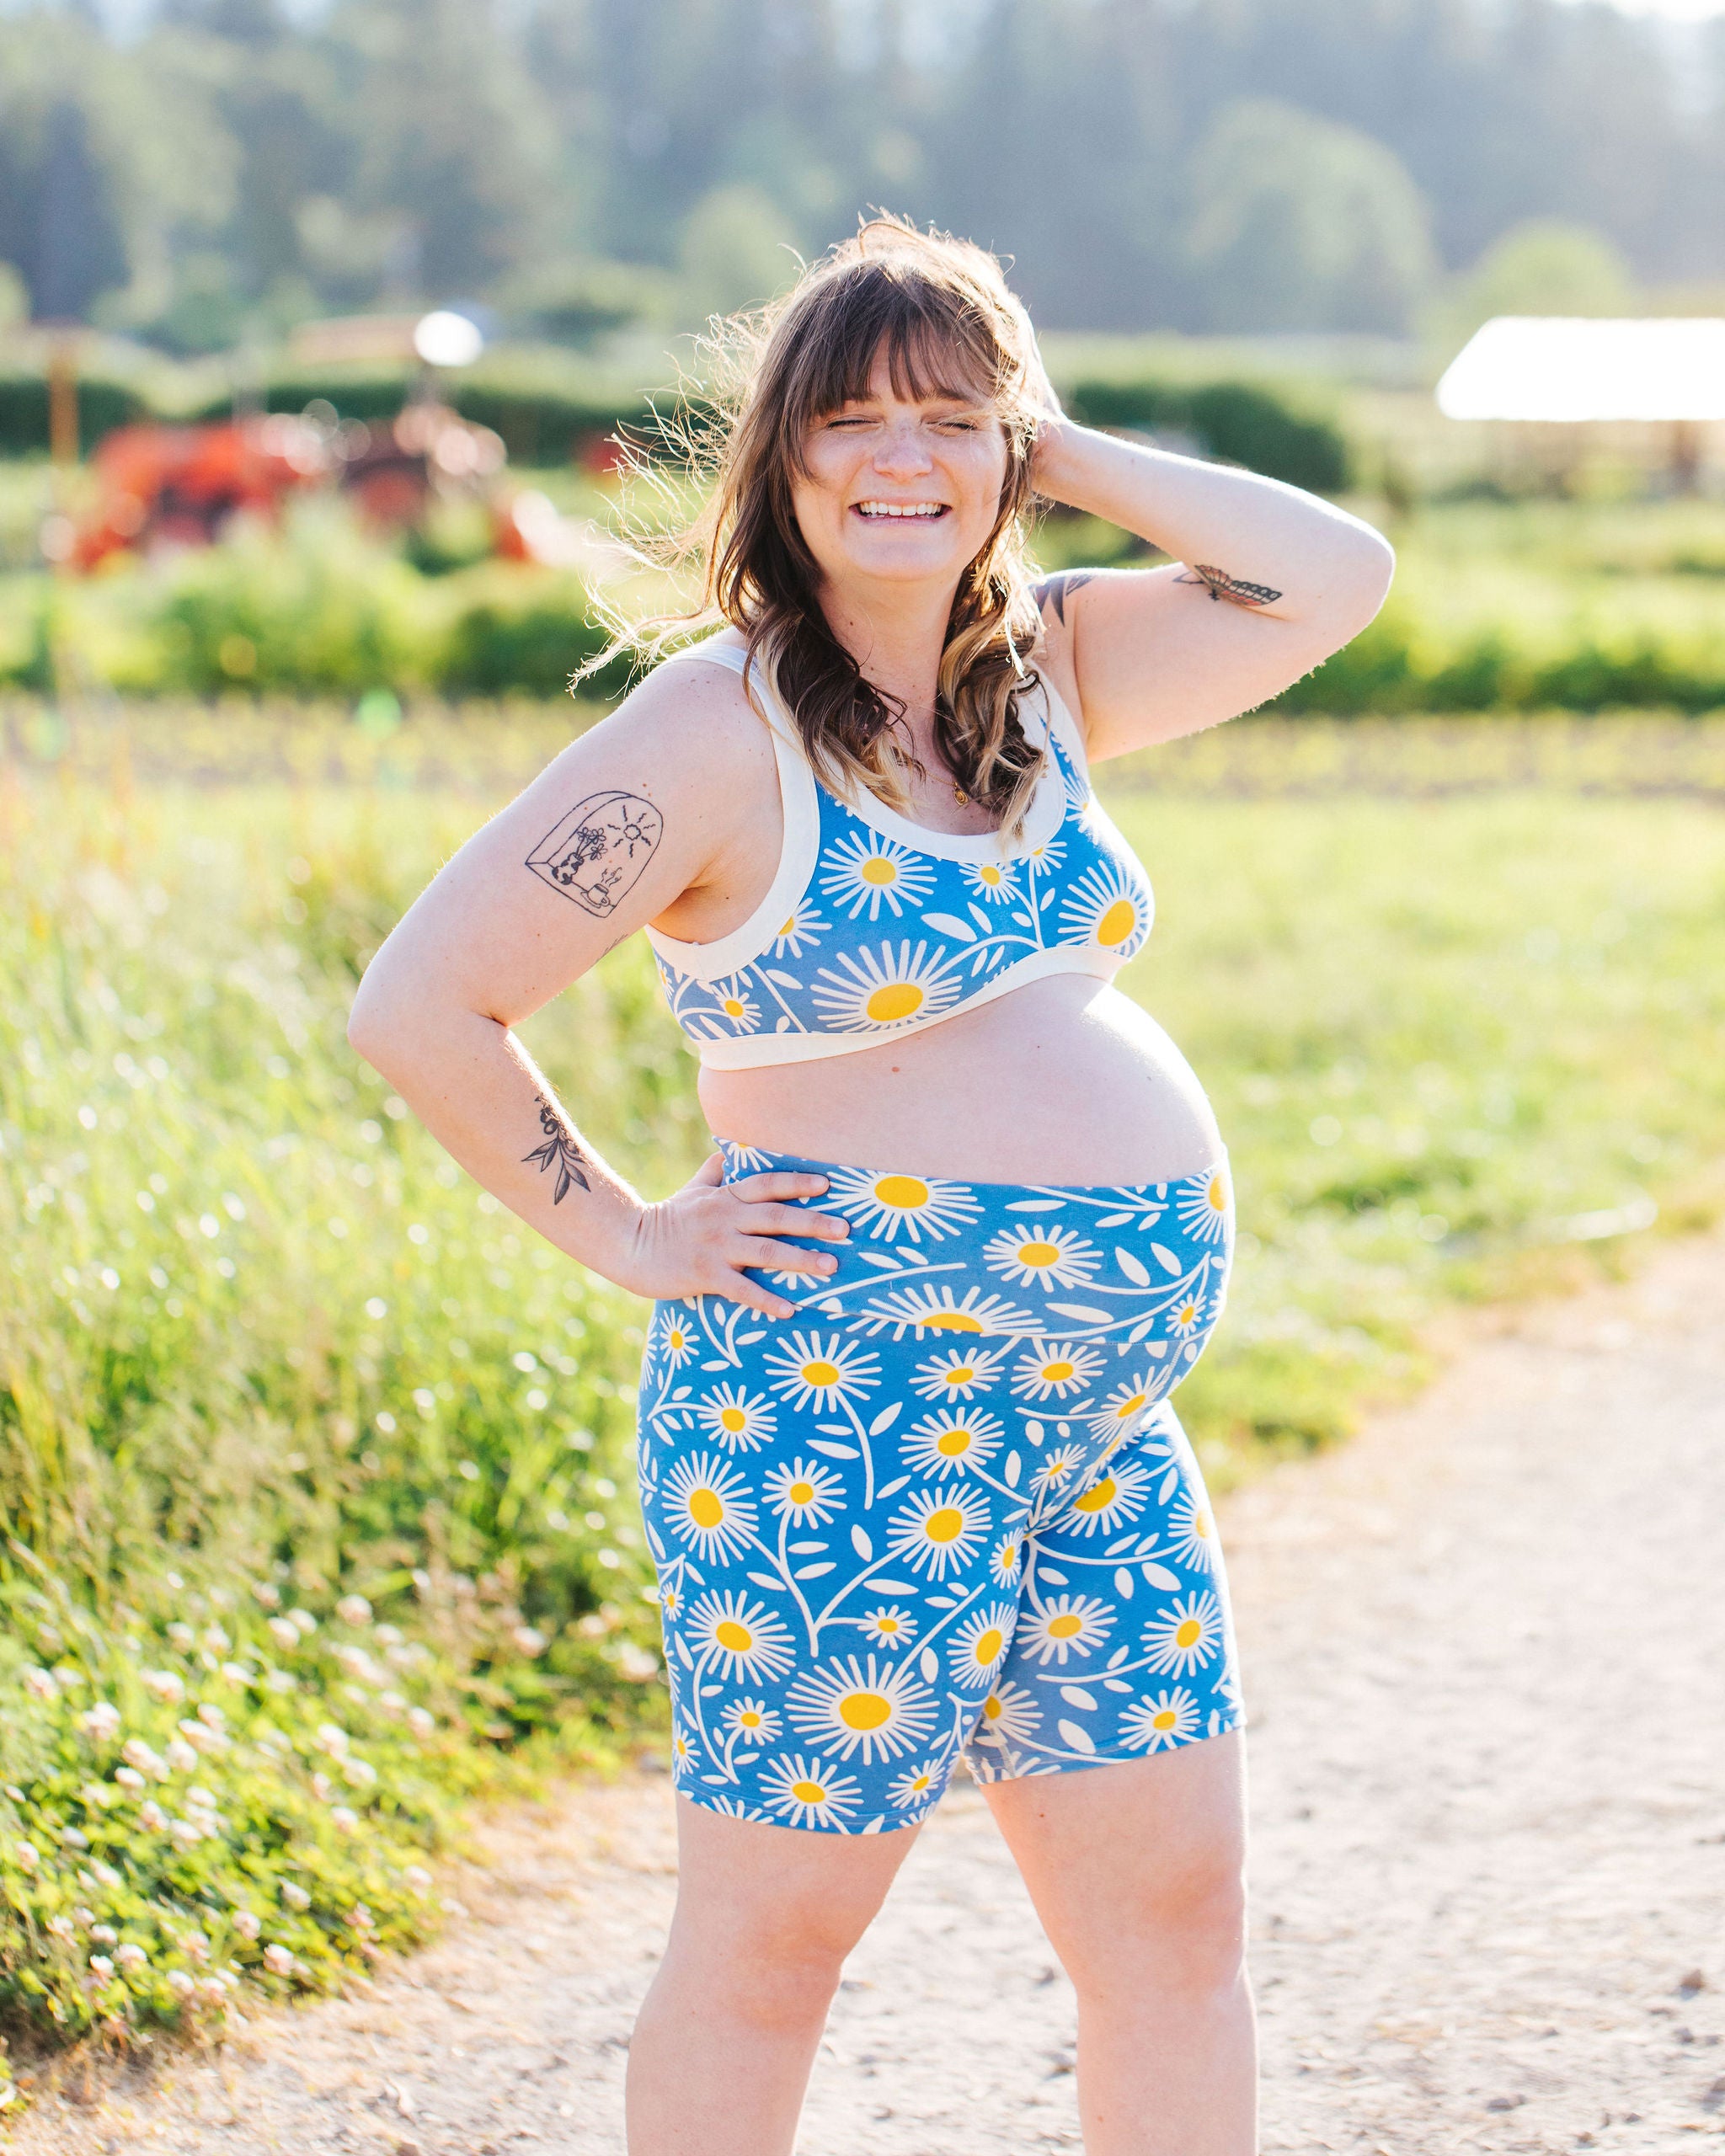 Pregnant model standing in a field wearing Thunderpants Bralette and Bike Shorts in Daisy Days print: blue with white and yellow daisies.